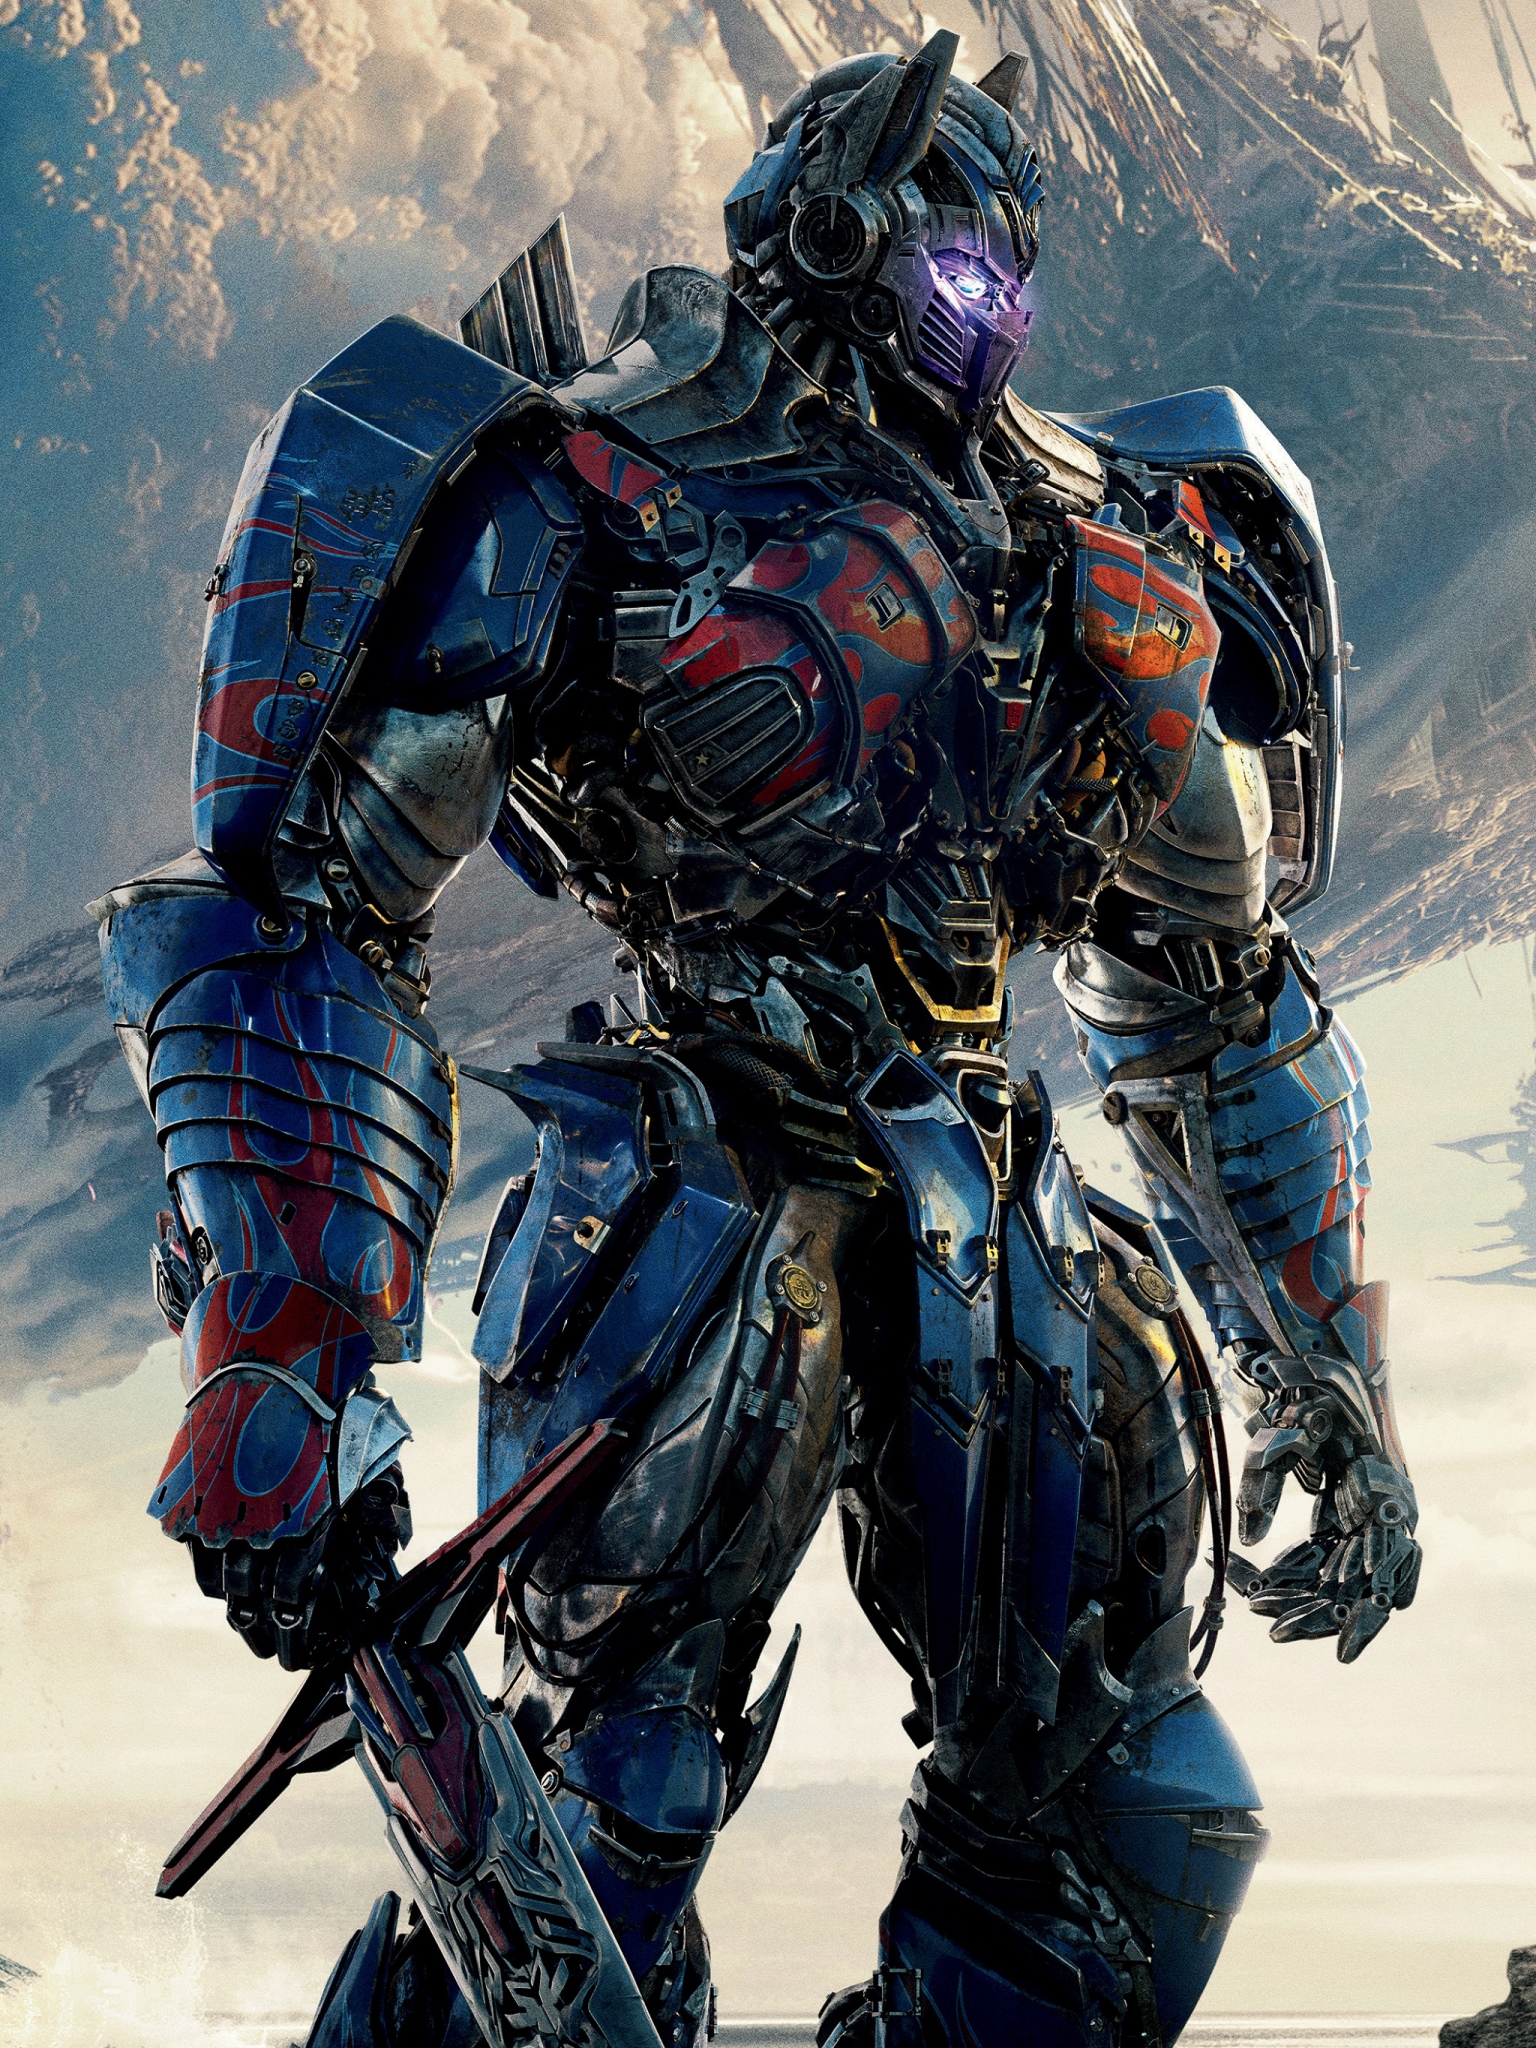 Optimus Prime Transformers The Last Knight for Apple iPad Air 2 resolution